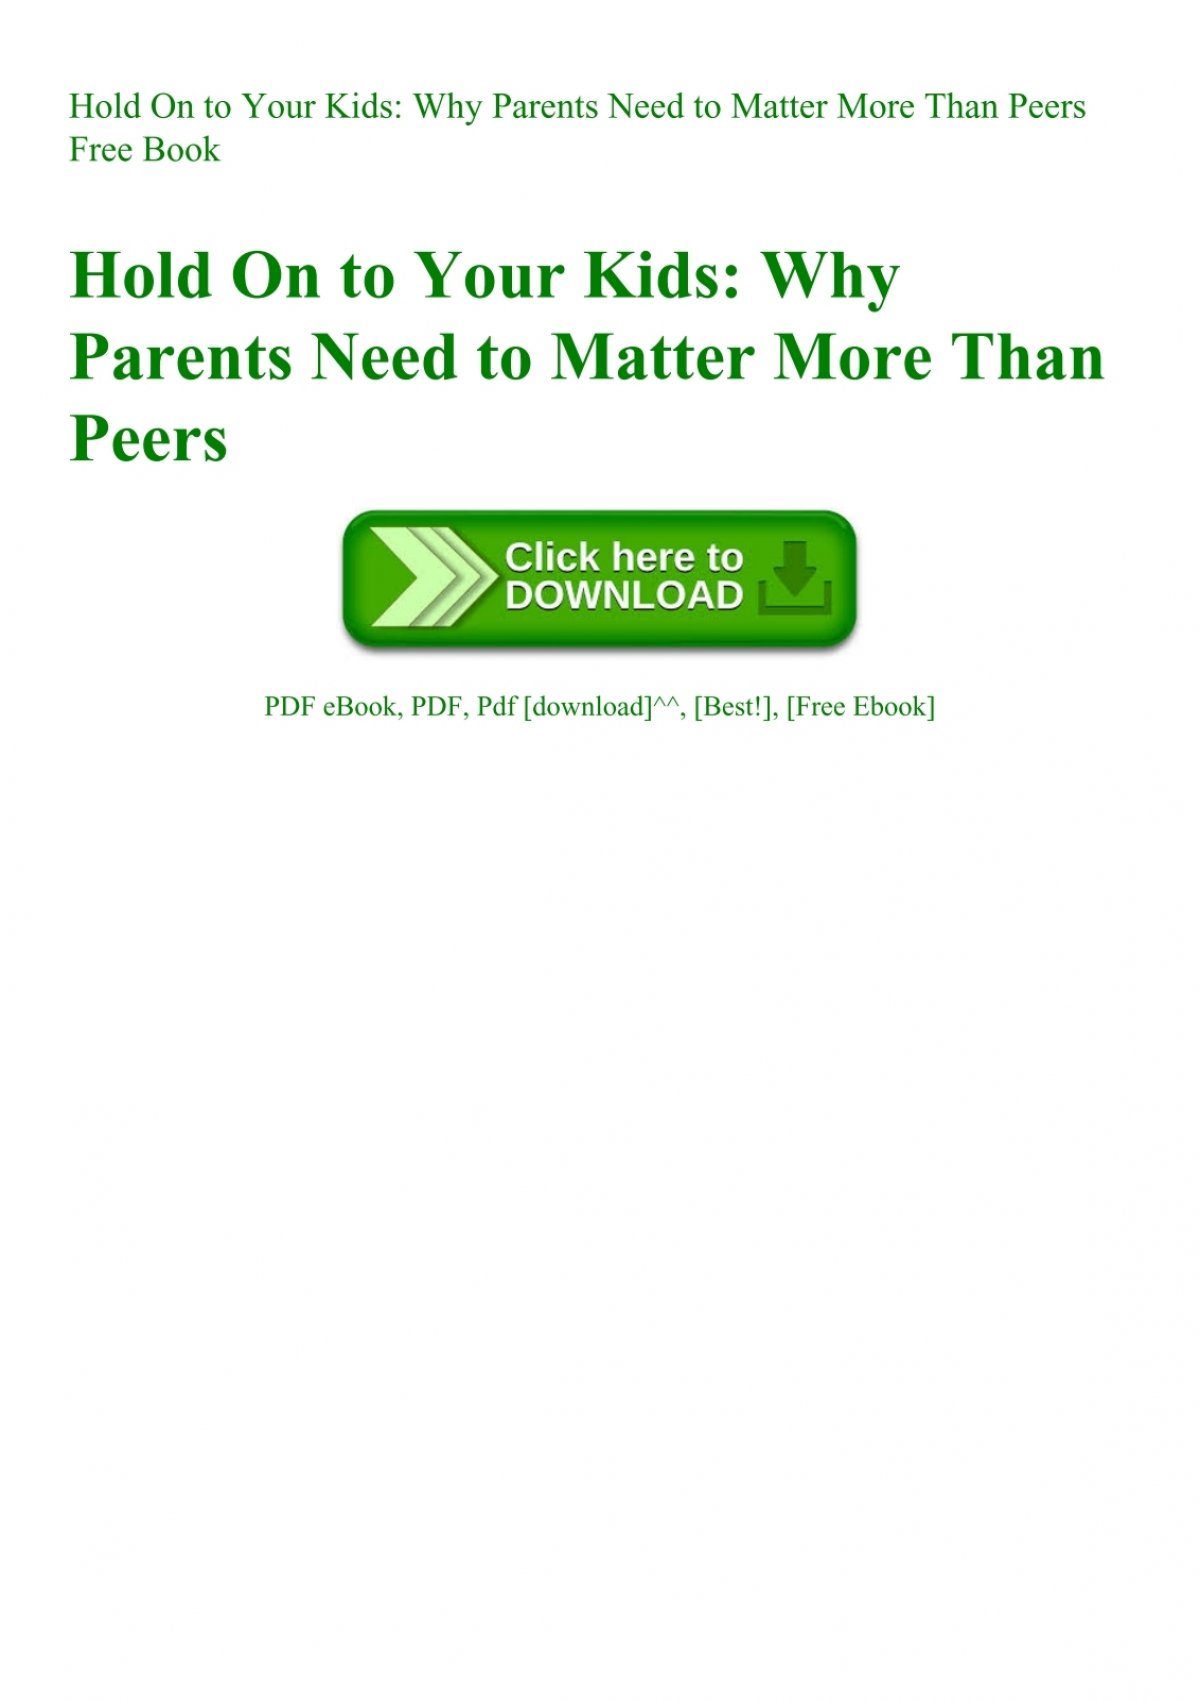 READ PDF On to Your Kids Parents Need to Matter More Than Peers Free Book